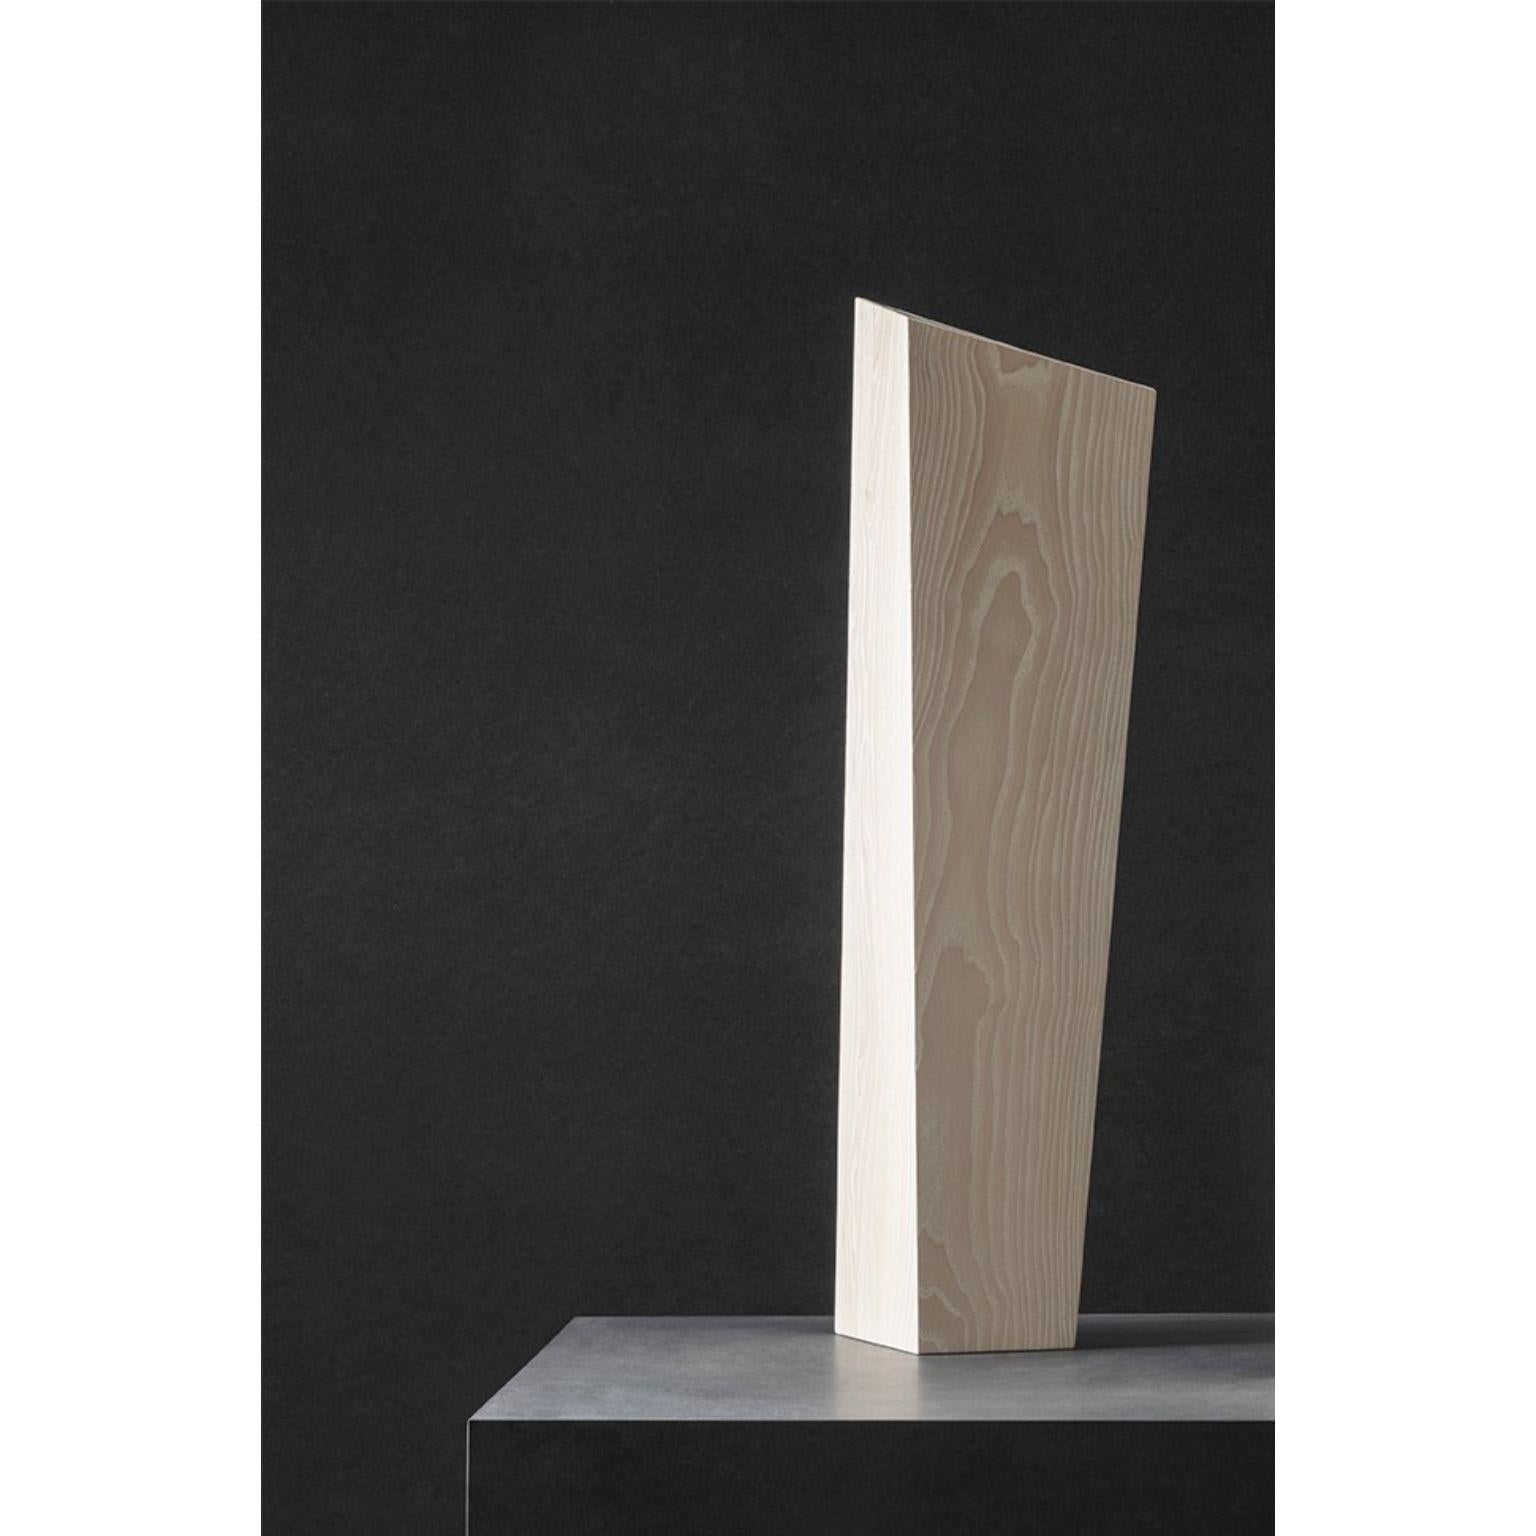 Large white ash nun vase by Matthias Scherzinger.
Limited Edition of 30 pieces, each colour each size.
Engraved brass-label with number.
Dimensions: L 19 x W 19 x H 73 cm.
Materials: ash: lyed - white.

Small size available:
 L 14.5 x W 14.5